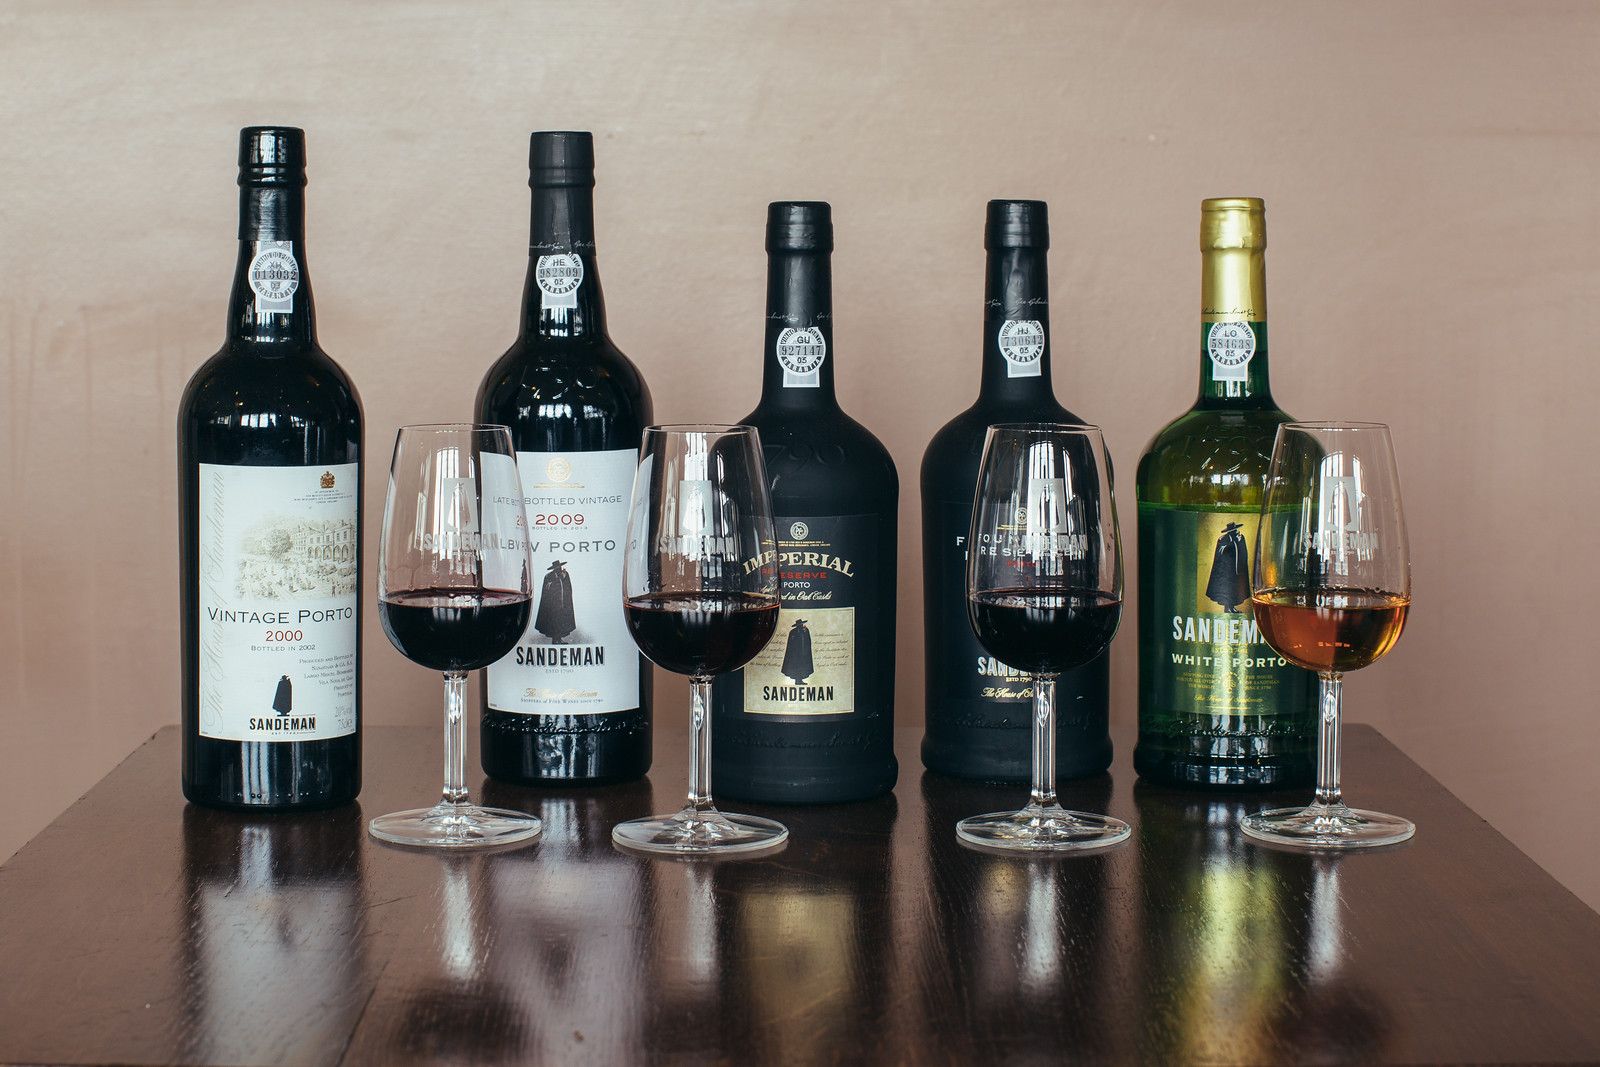 A small selection of the Lancaster House Sandeman Collection